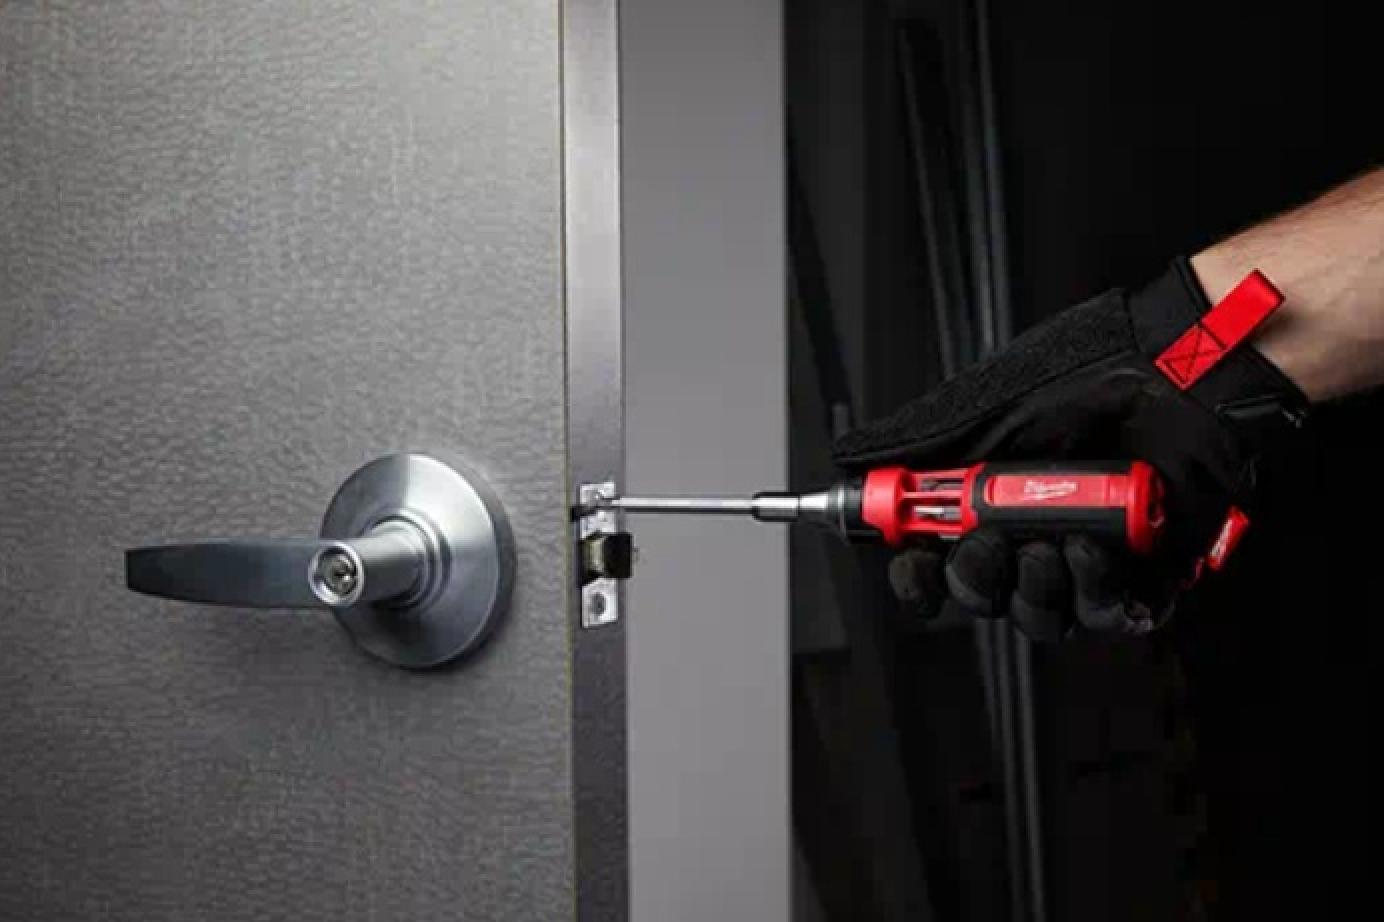 Milwaukee 9-in-1 Square Drive Ratcheting Multi-bit Driver